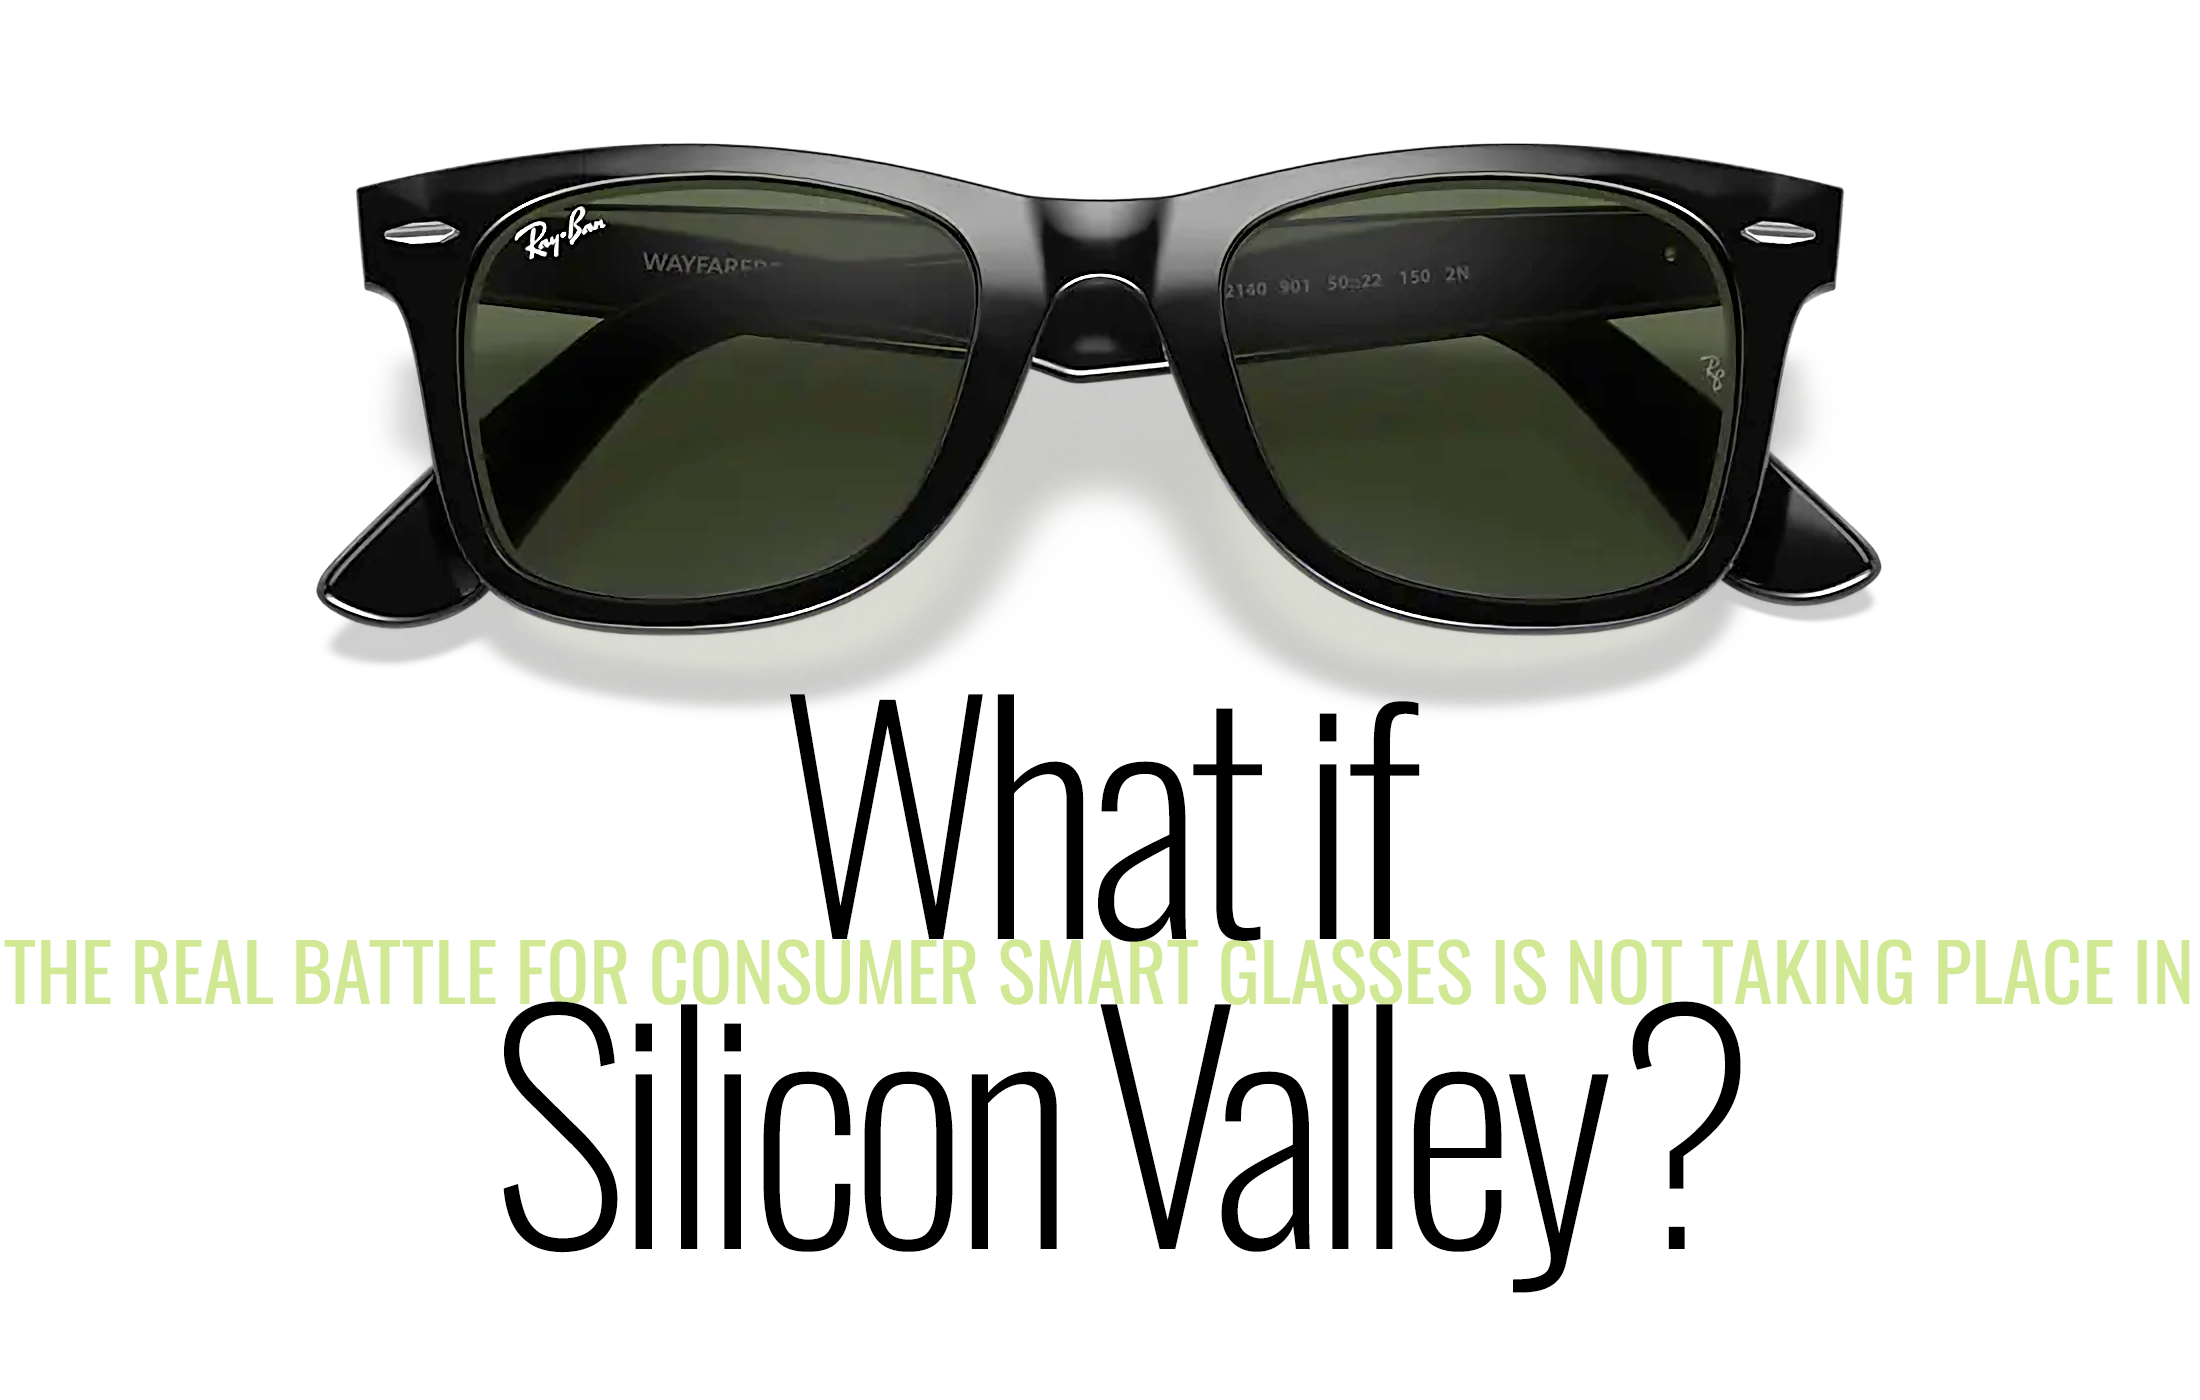 photo of Ray-Ban Wayfarer with Headline: What if the battle for consumer smart glasses is not taking place in Silicon Valley?